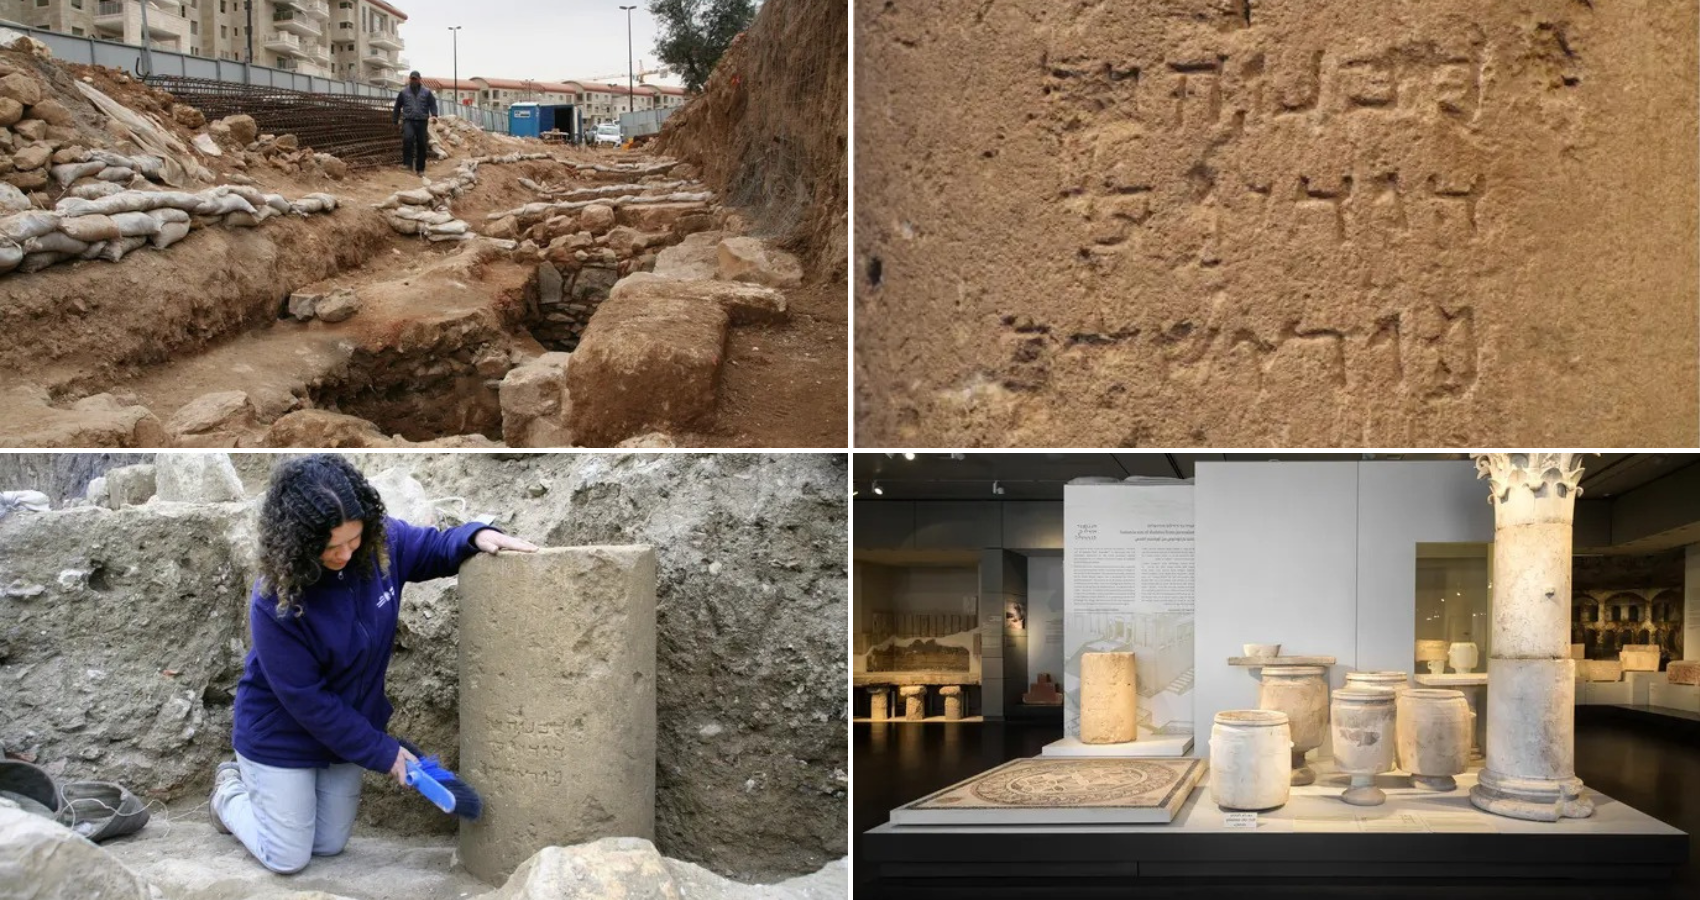 Ancient inscription discovery thrills archaeologists in Israel